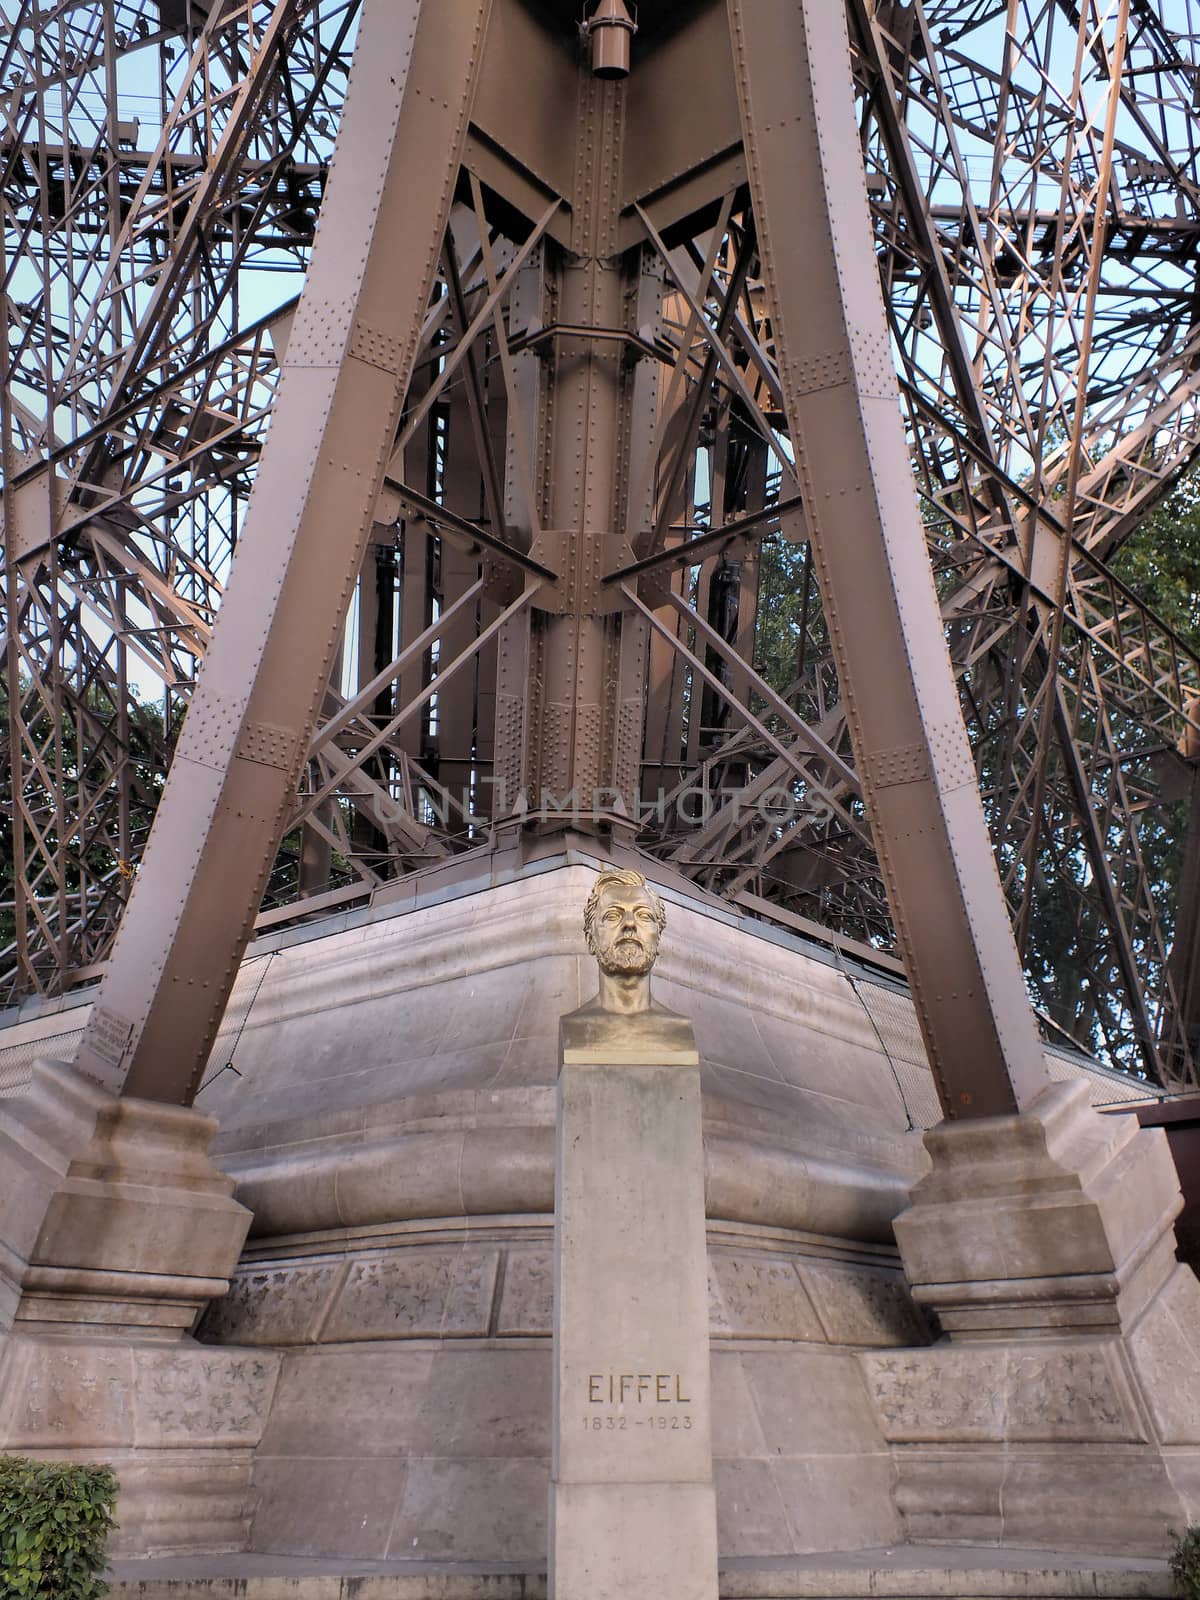 The Eiffel Tower (La Tour Eiffel) was named after the engineer Gustave Eiffel, whose company designed and built the tower. His bust is displayed underneath one of the tower's legs.